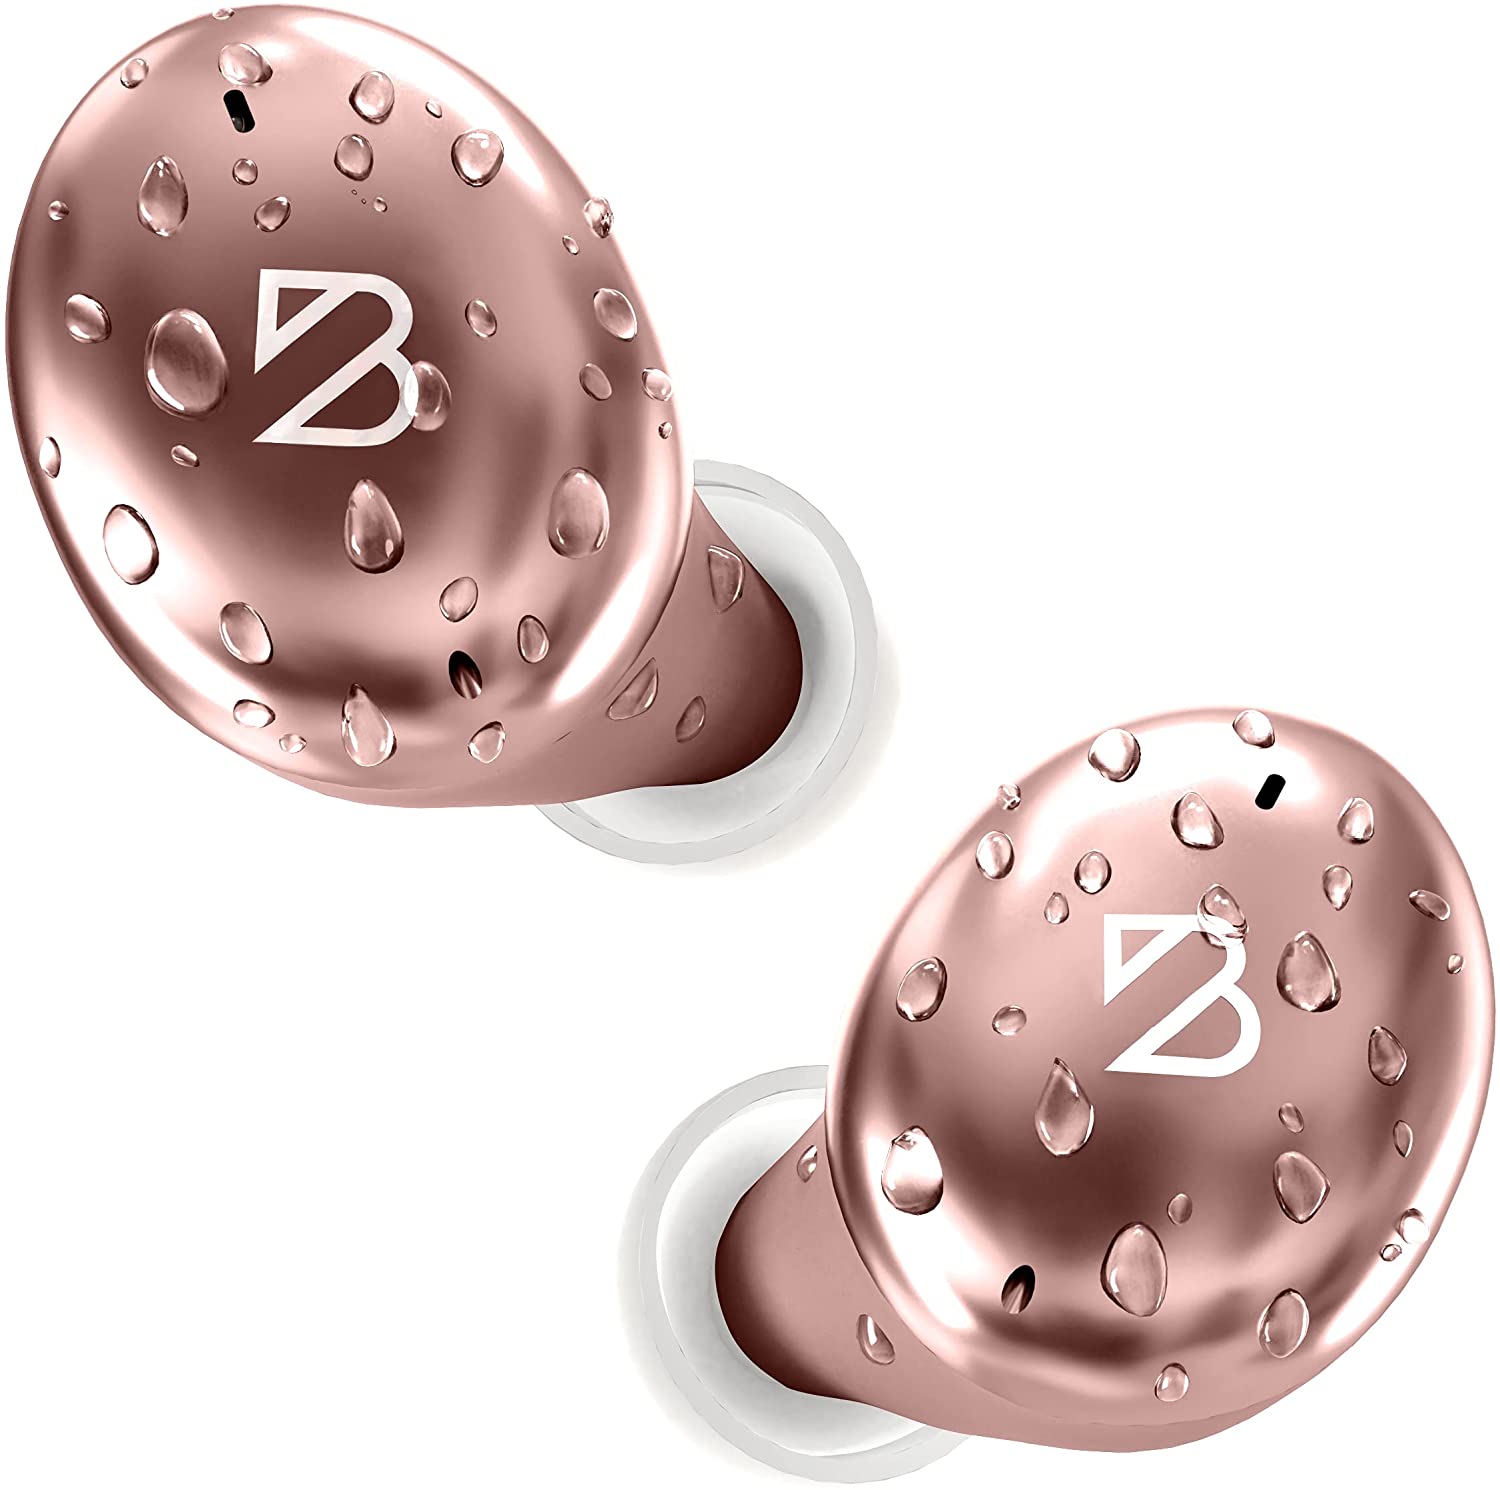 Tempo 30 Rose Gold Wireless Earbuds for Small Ears